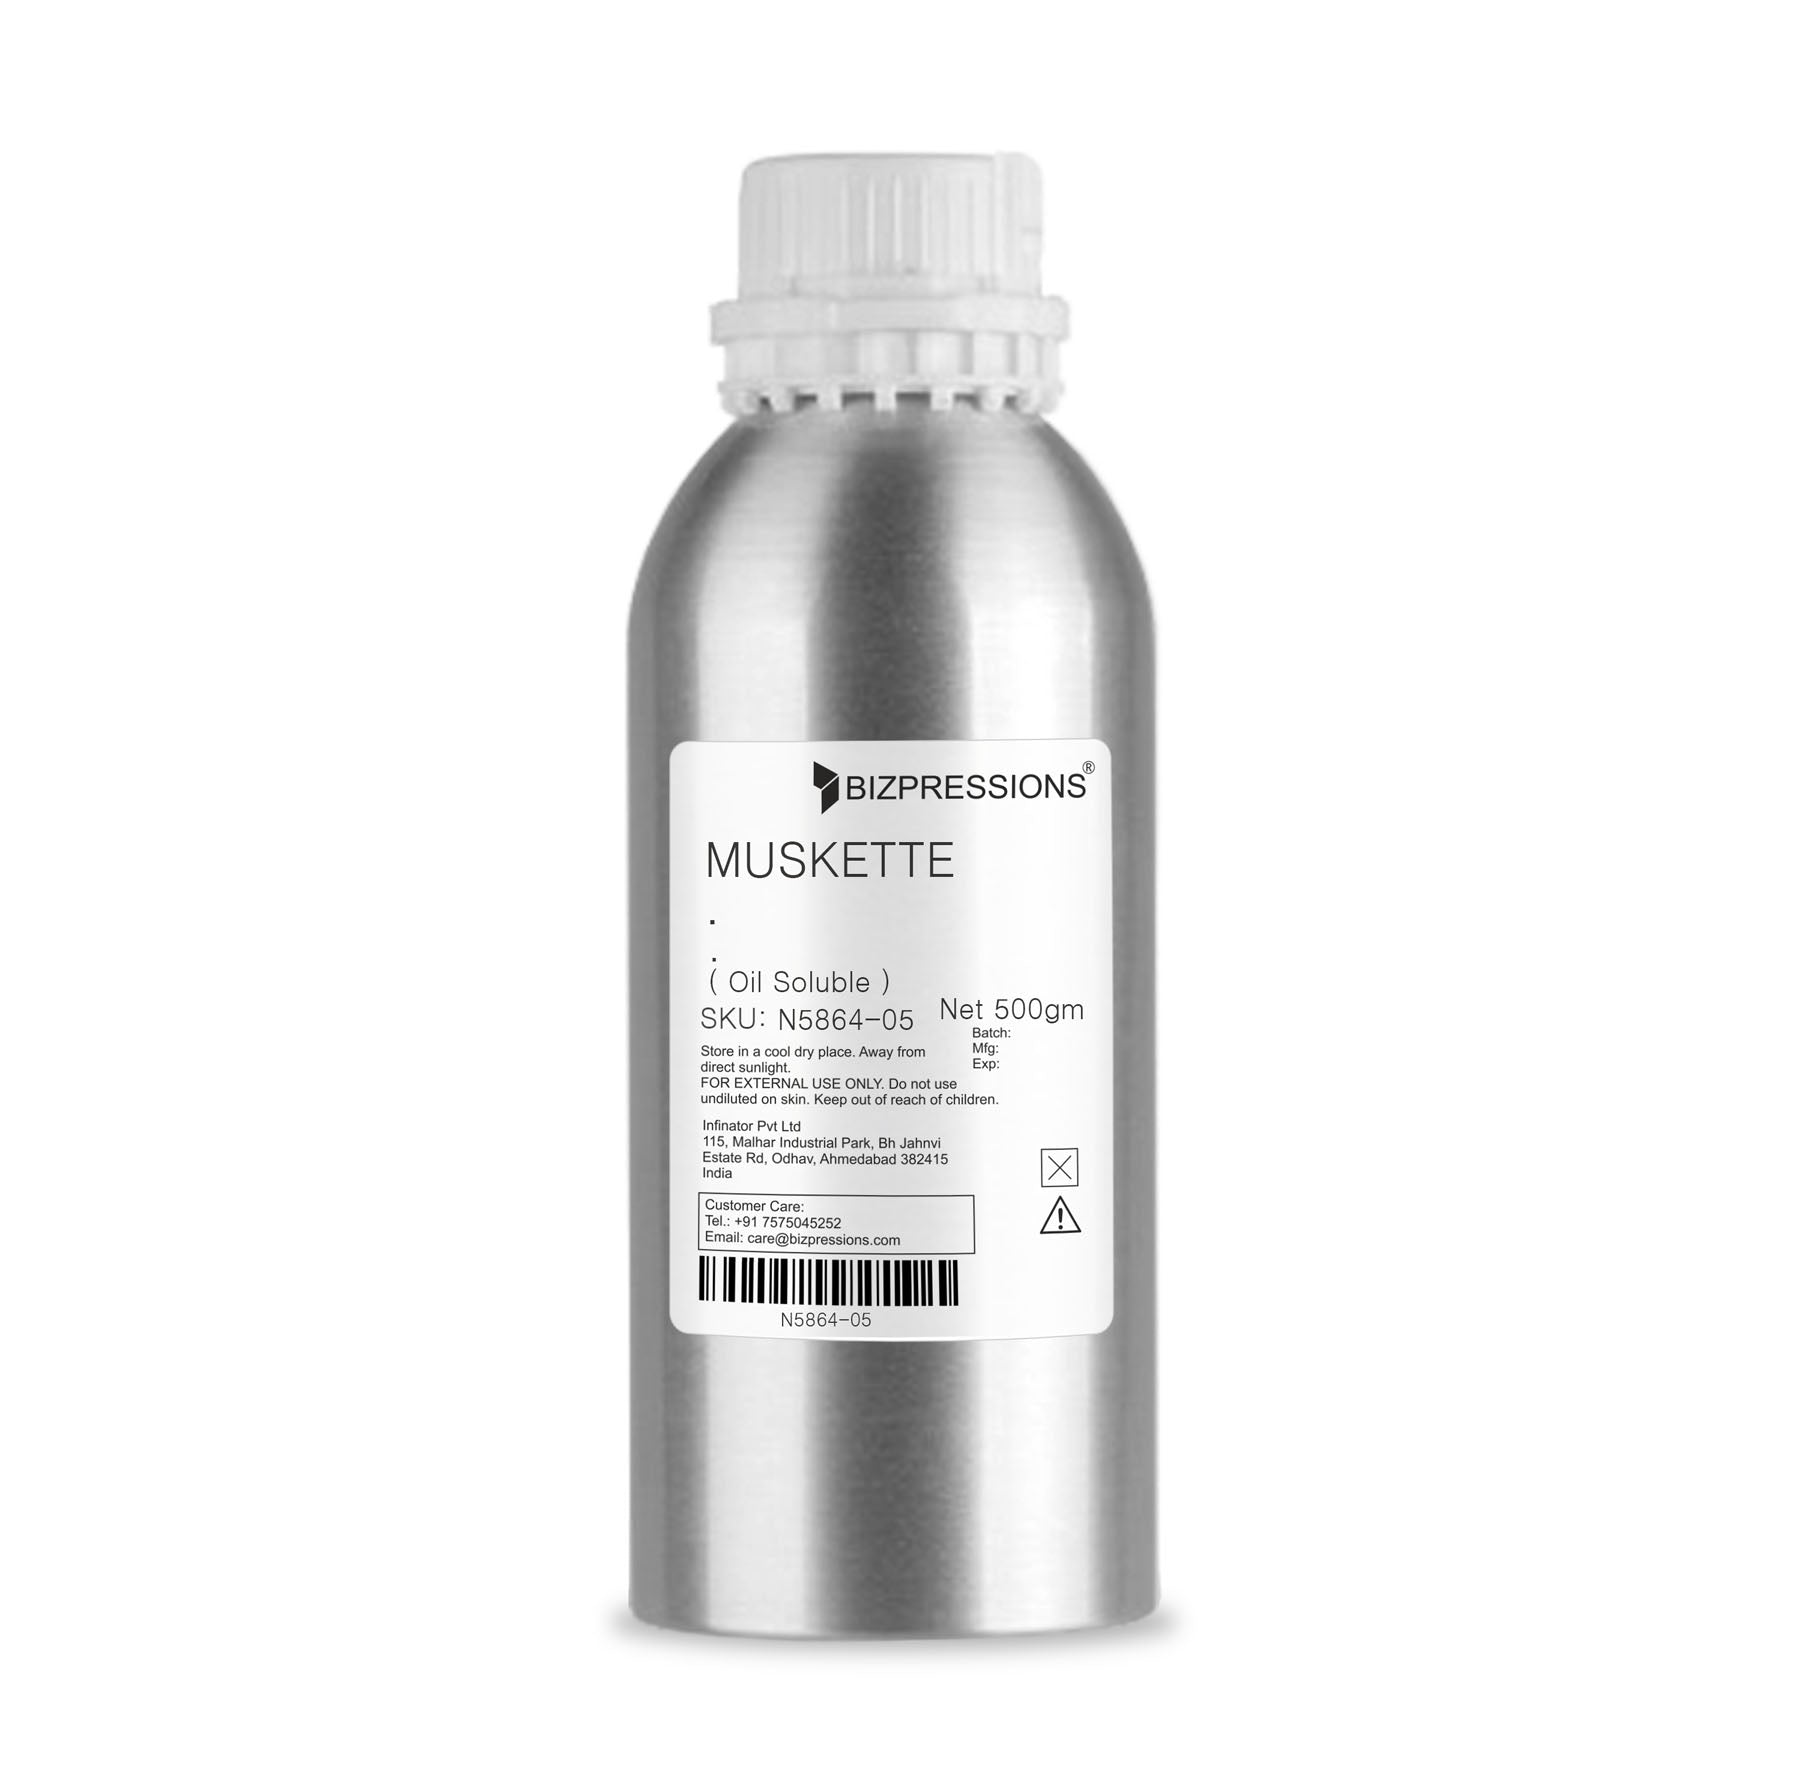 MUSKETTE - Fragrance ( Oil Soluble ) - 500 gm